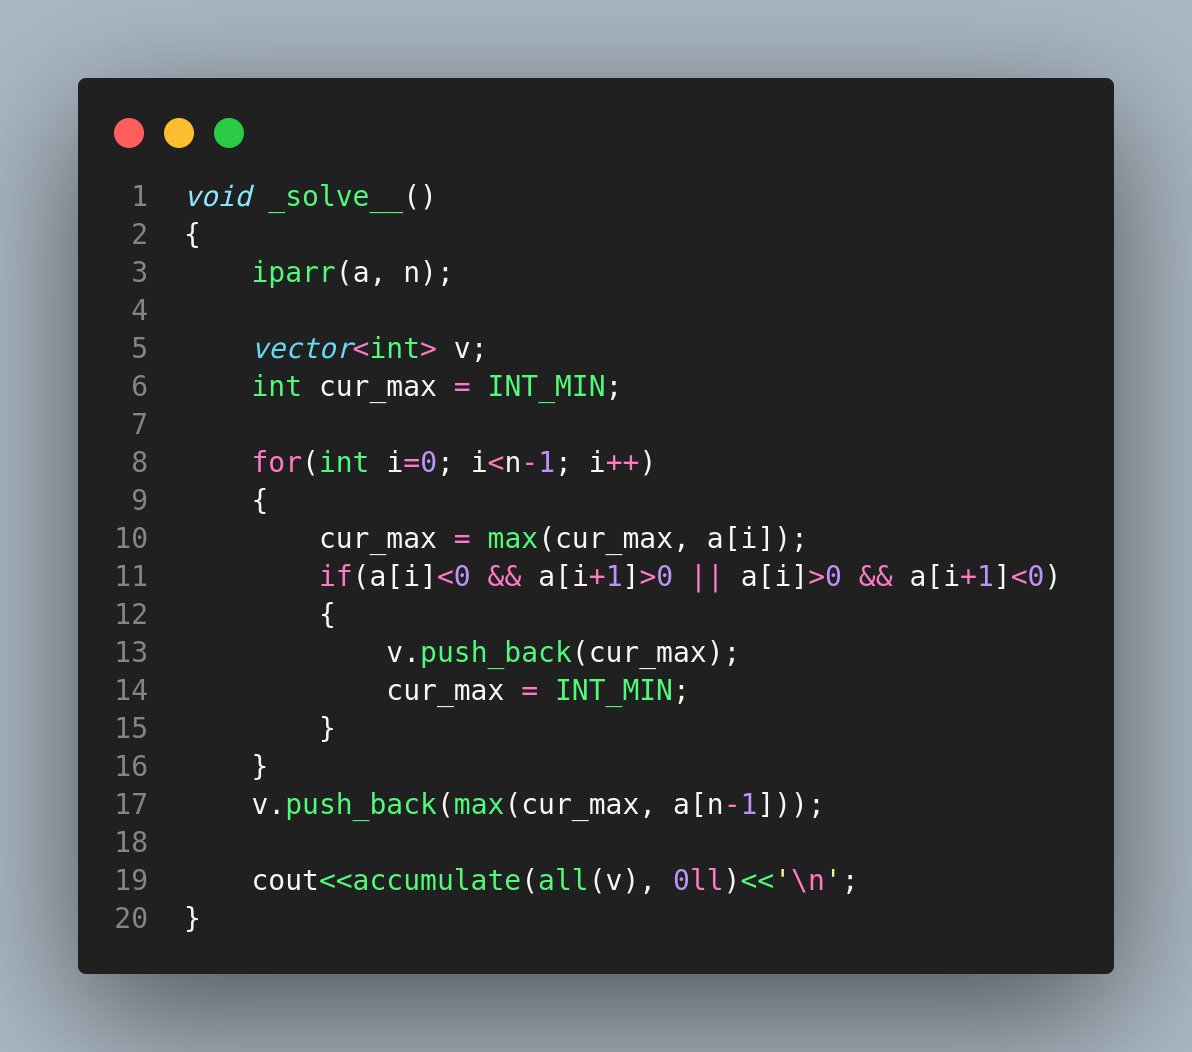 Day_4.2 #codeforces
codeforces.com/problemset/pro…

Since we need the longest possible LEN of the alternating Seq with max sum We have to consider all alterations.

Break the array in continuous adj subarrays containing elements of 'Same Sign' then pick the maximum out of that subarray.